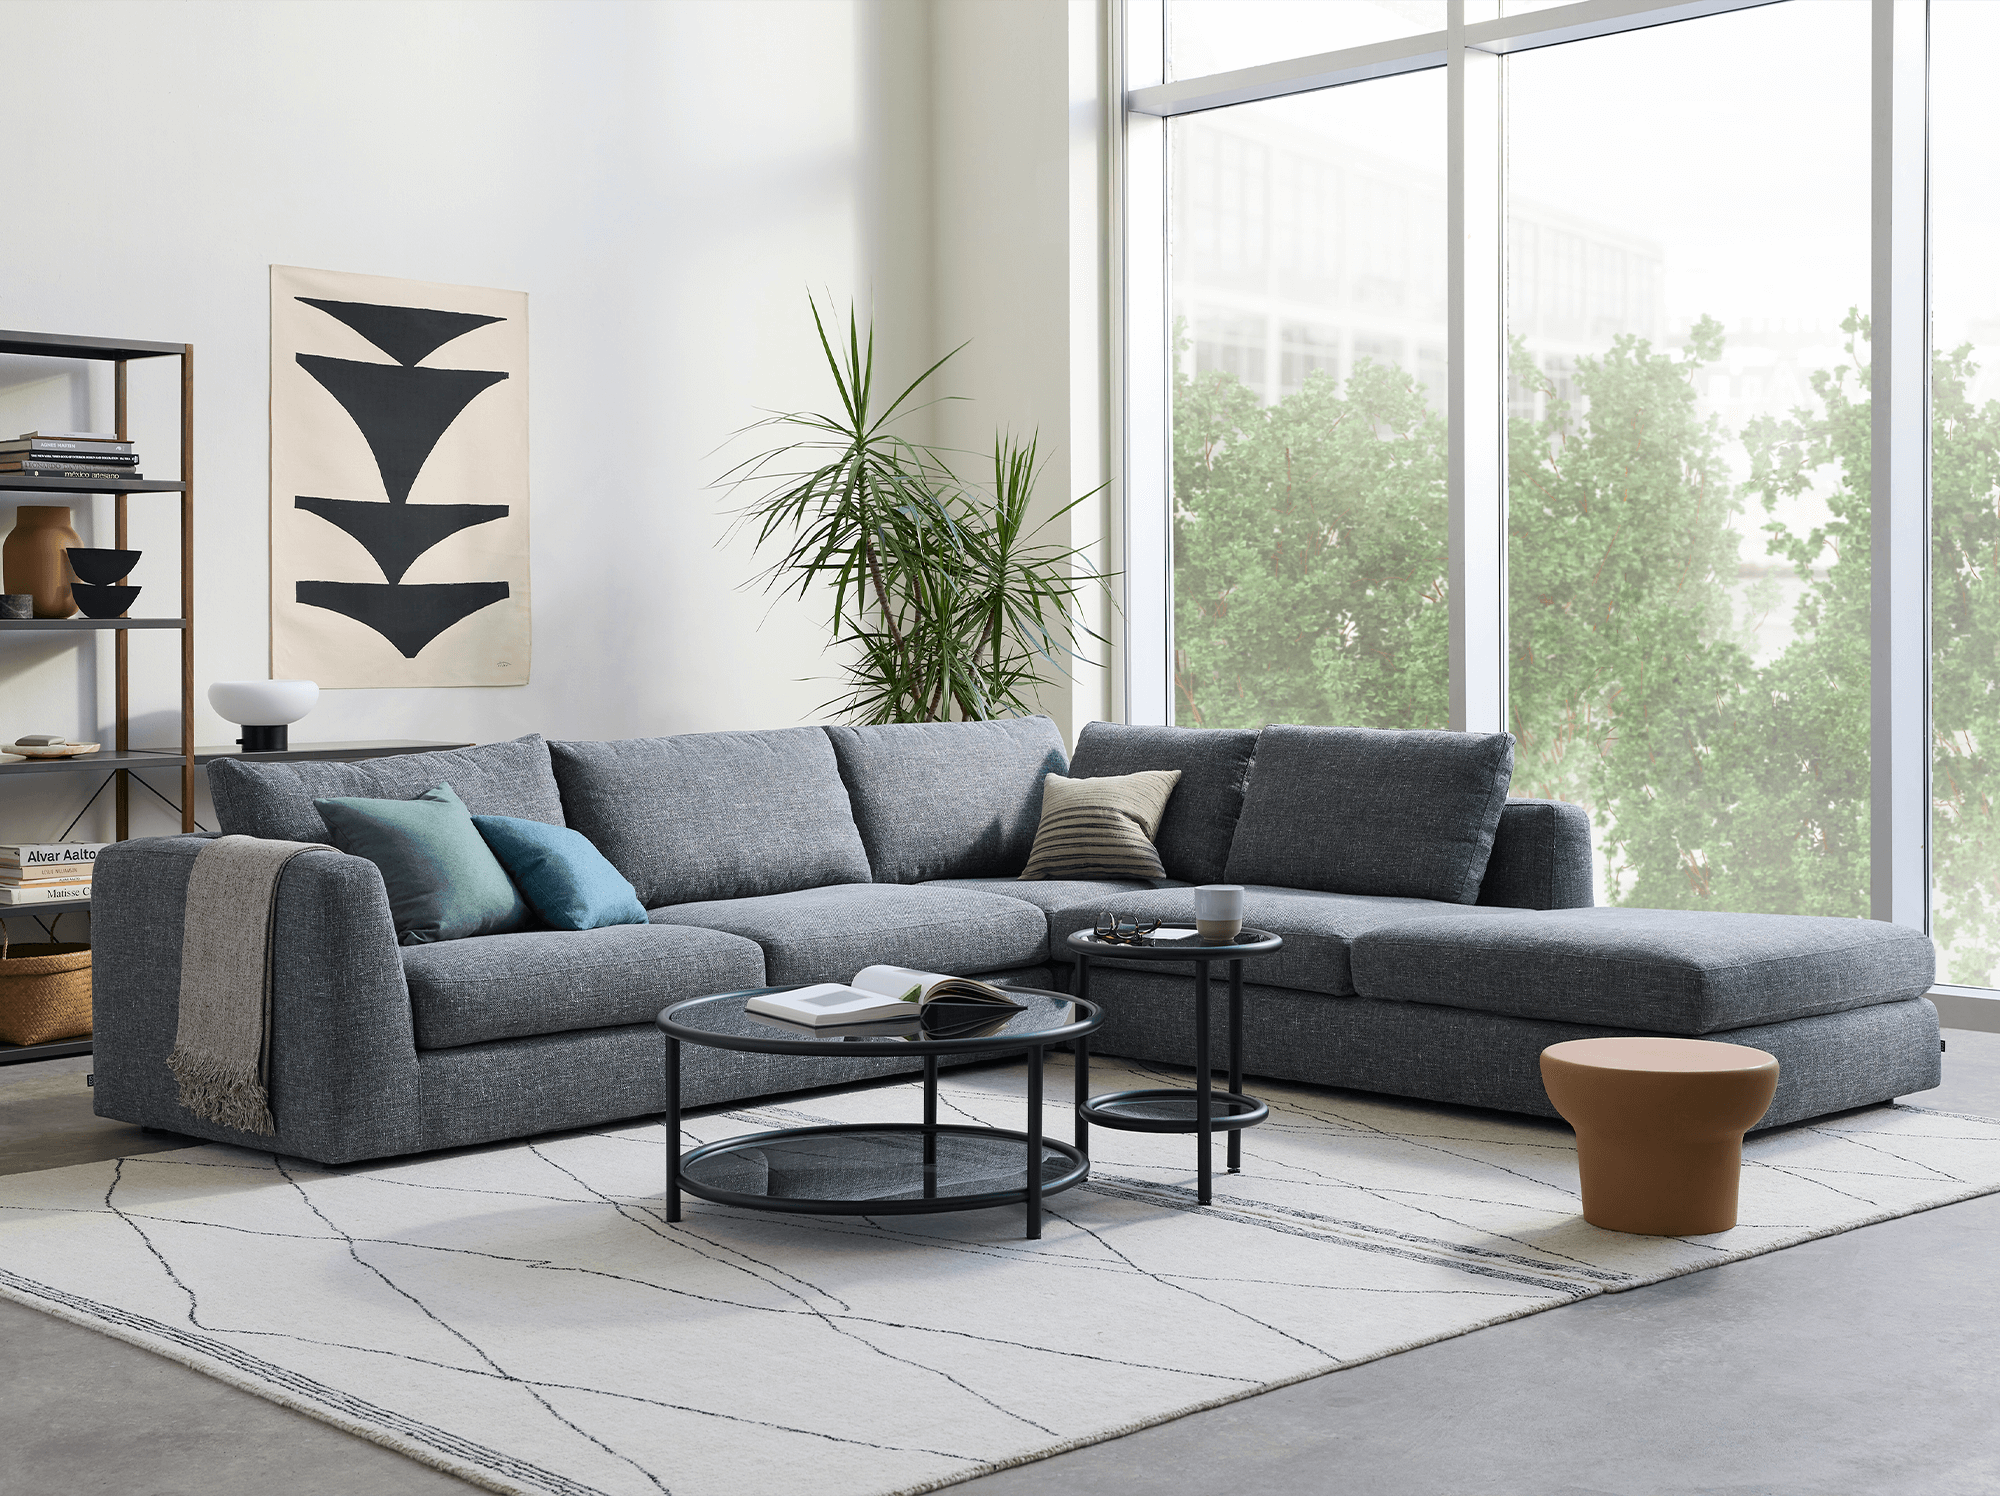 Cello Sectional Sofa Custom Fabric Or, Grey Leather Sectionals With Chaise